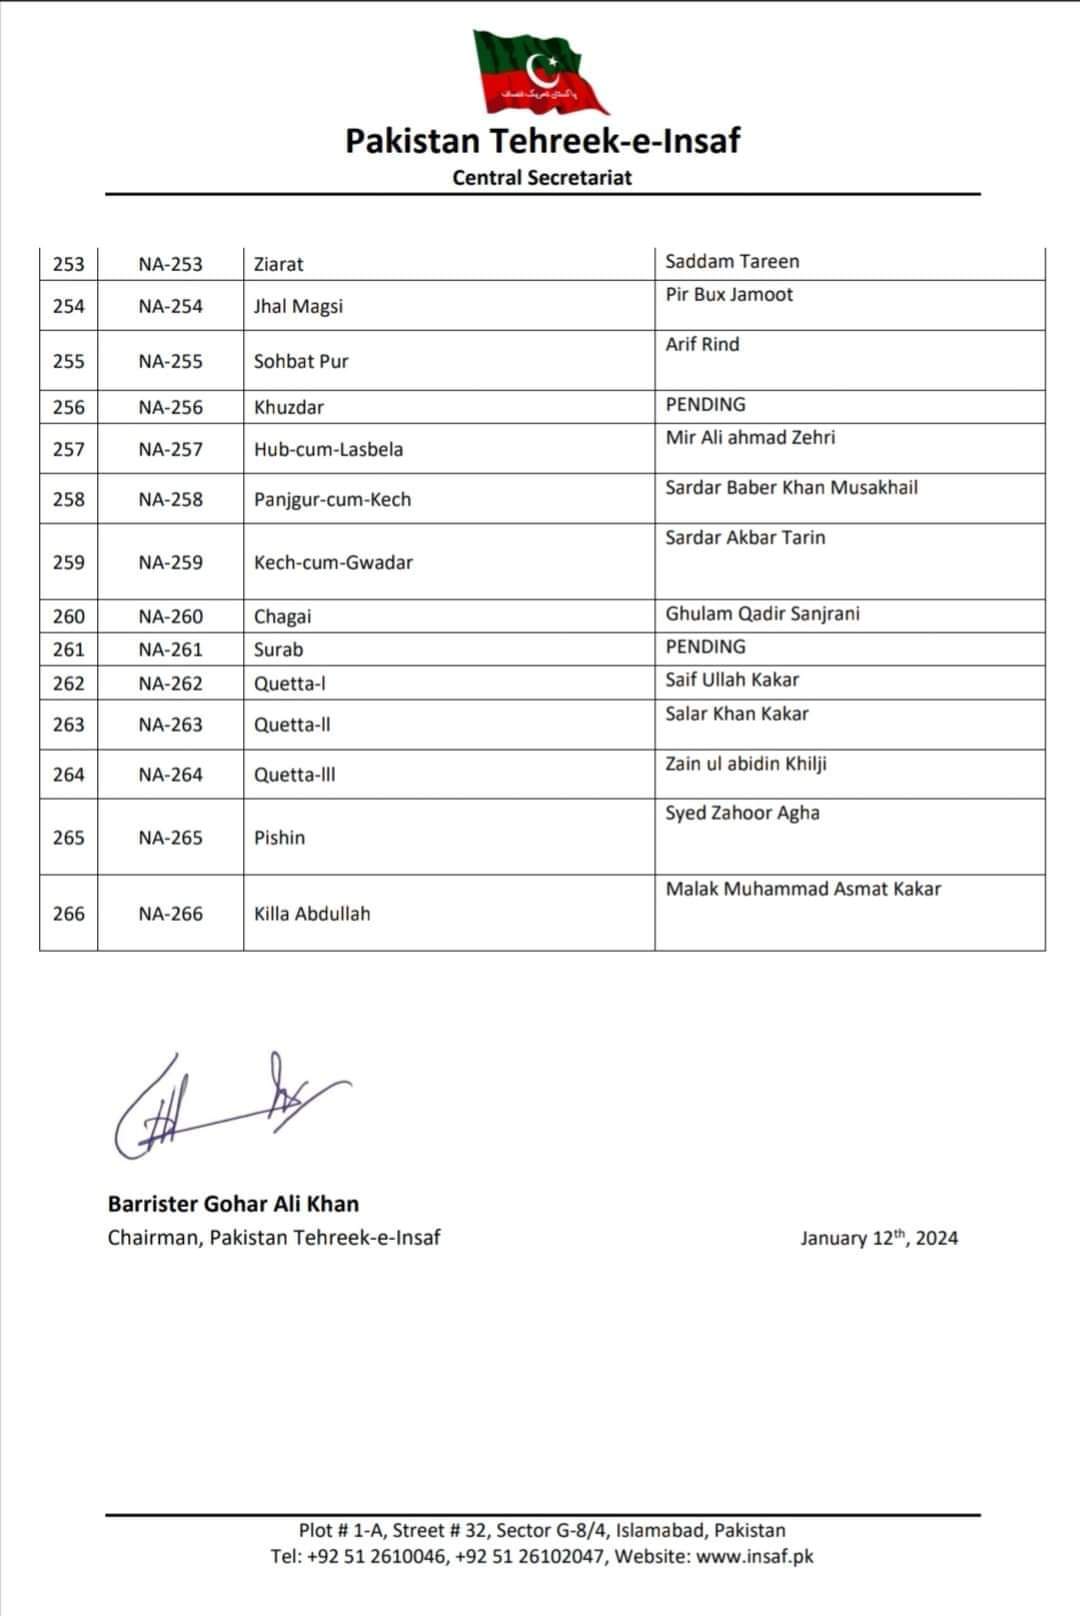 NATIONAL ASSEMBLY LIST OF PTI CANDIDATES